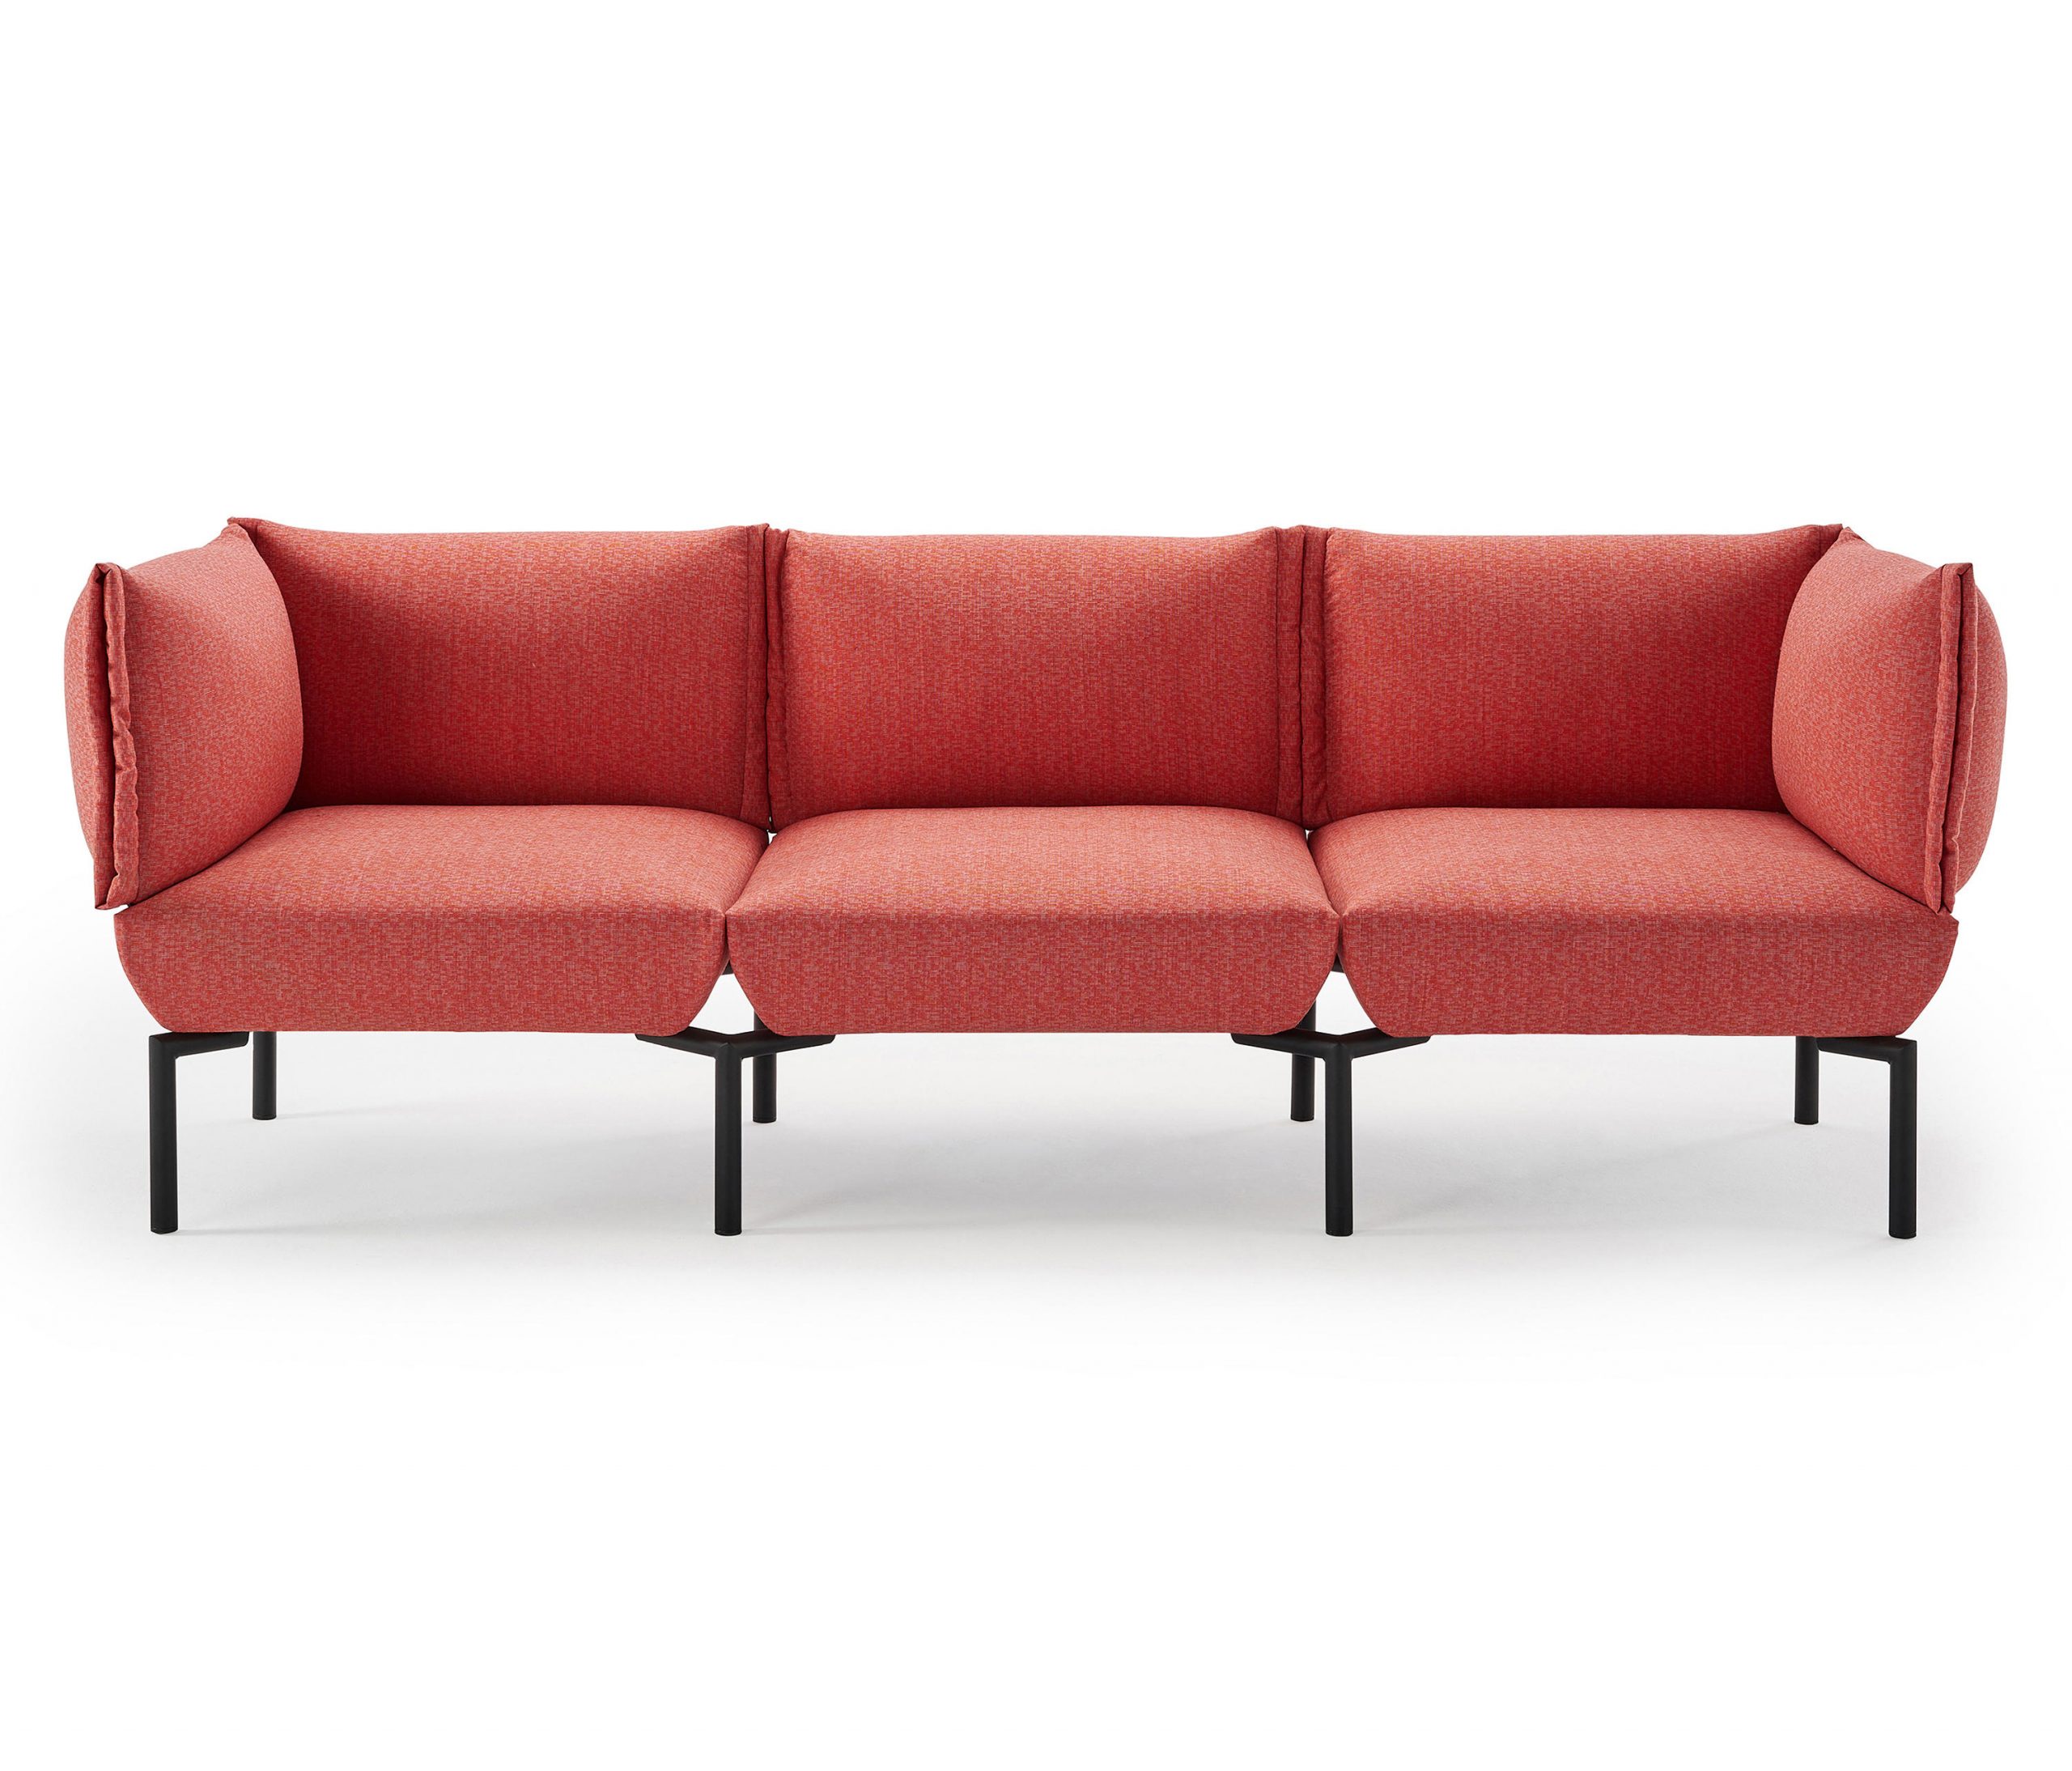 Click Seating Collection by Toni J. Castaño for Sancal